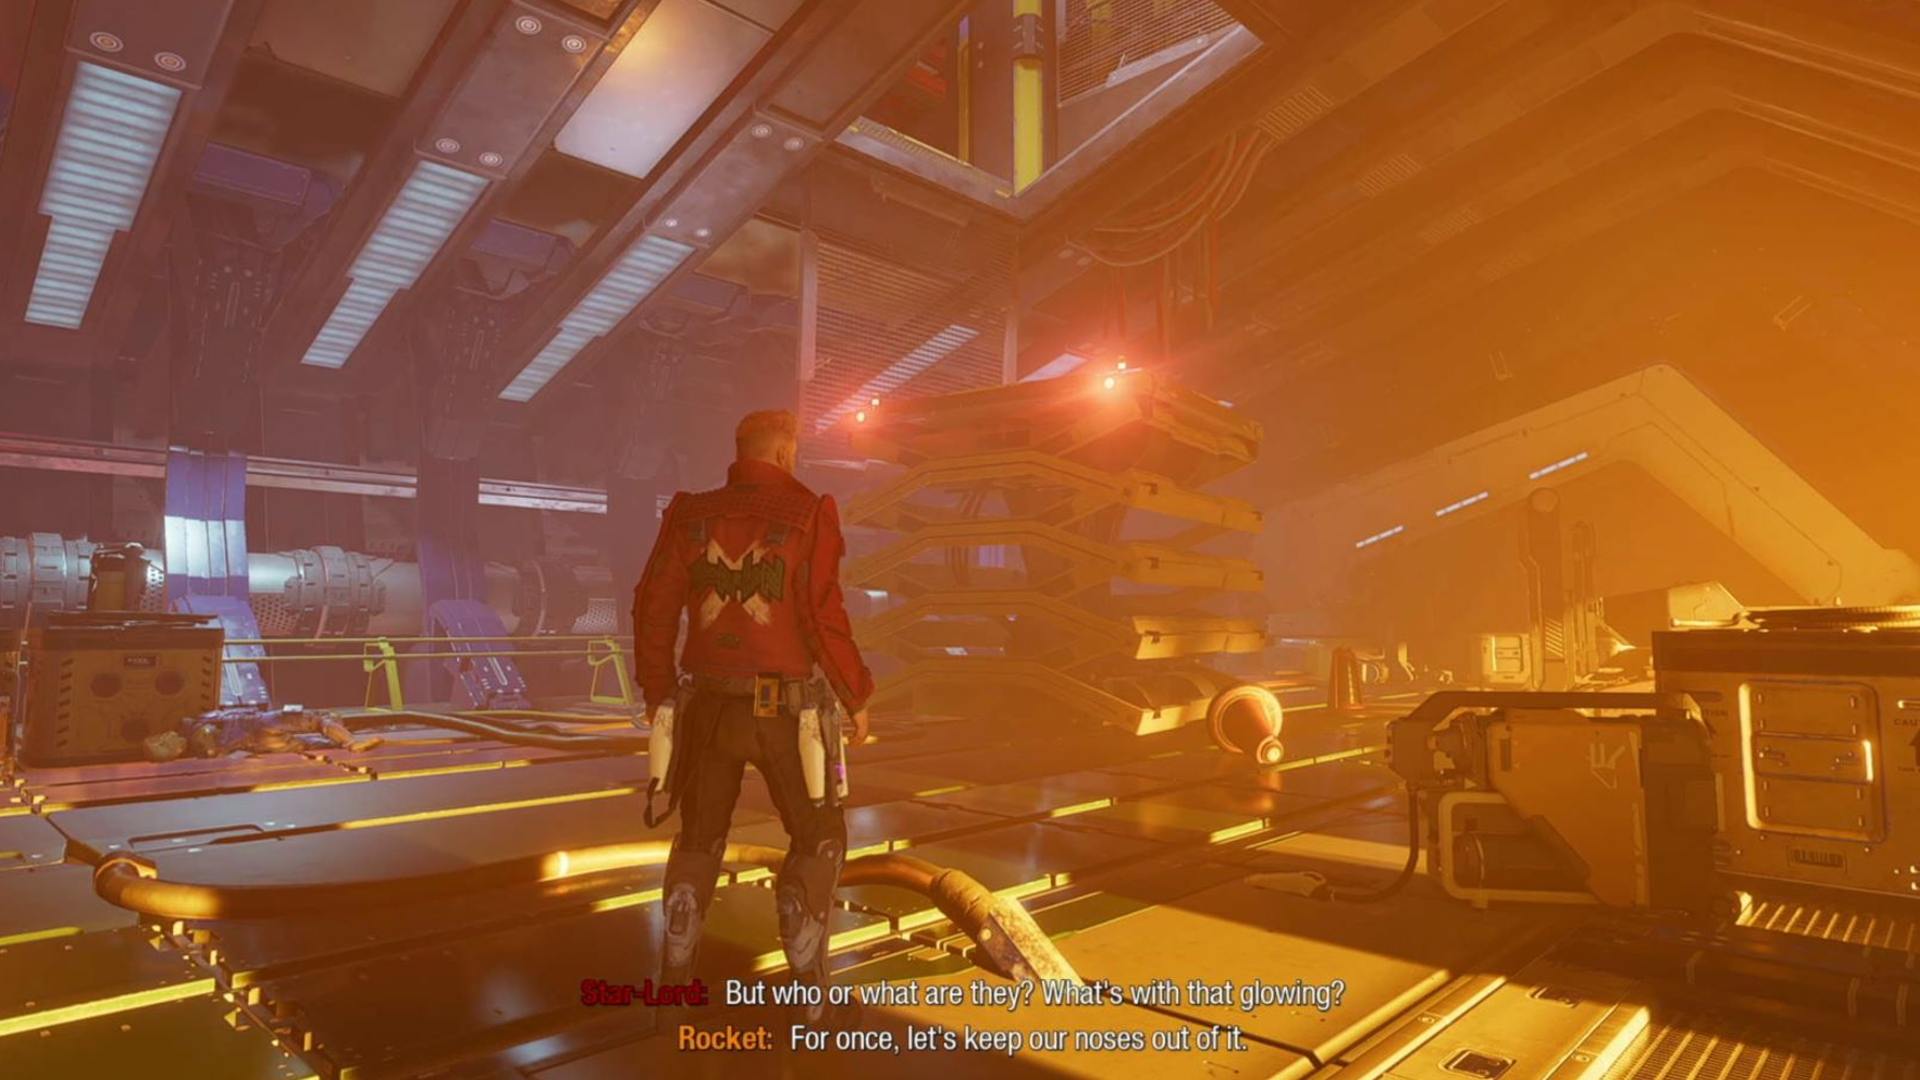 Guardians of the Galaxy outfit locations: Star-Lord is staring at the lift leading up to the next area of the level.